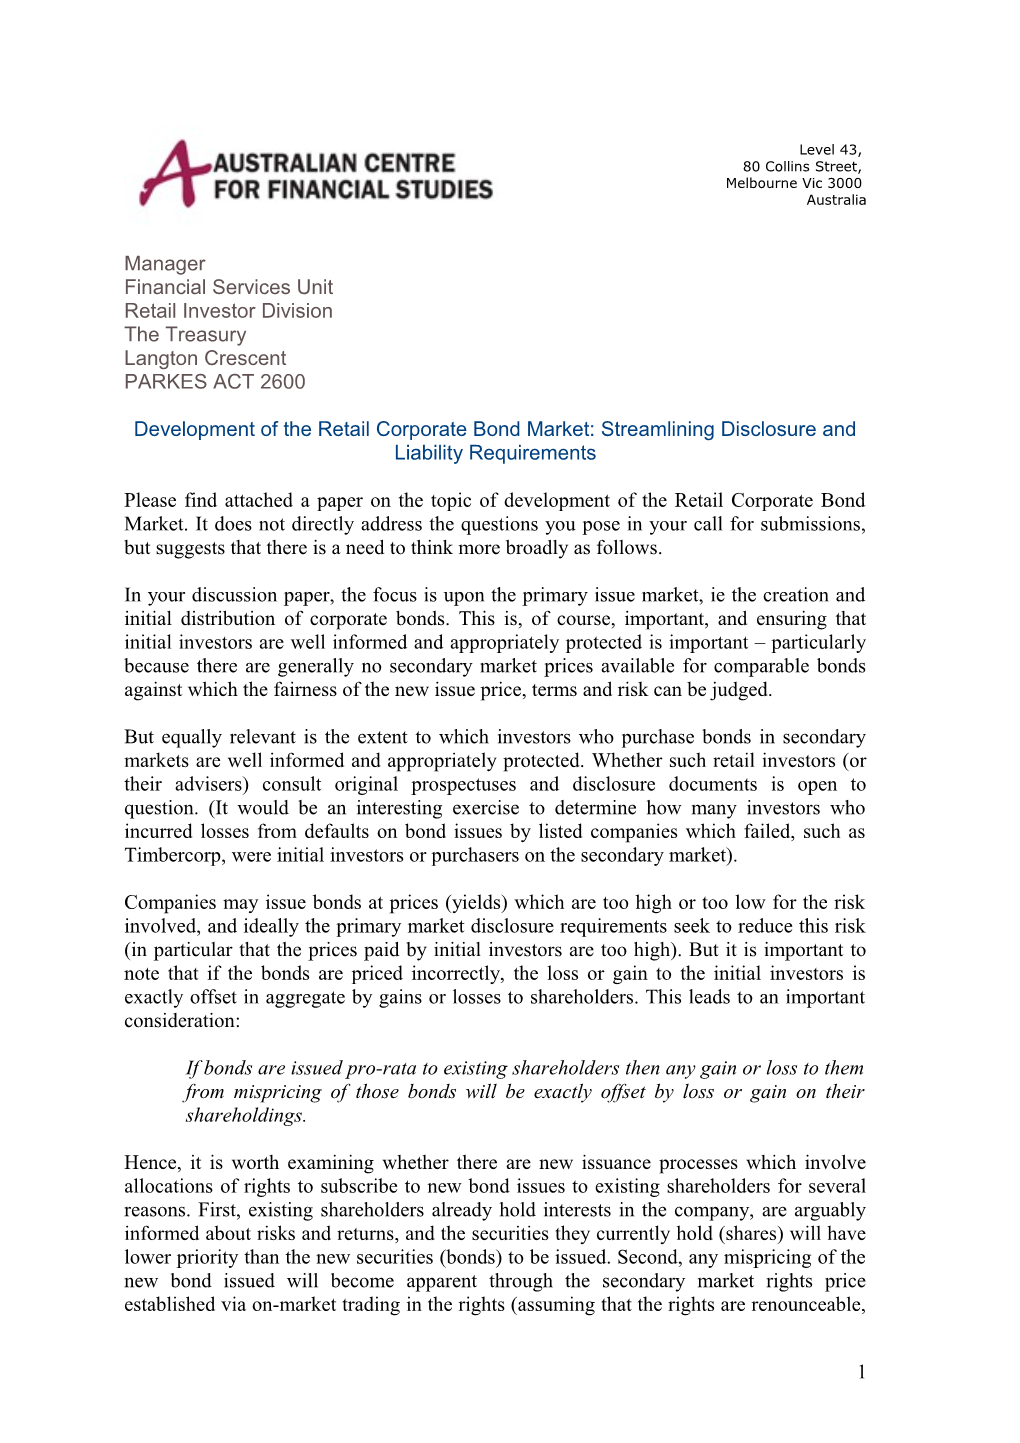 Submission: Discussion Paper - Development of the Retail Corporate Bond Market: Streamlining